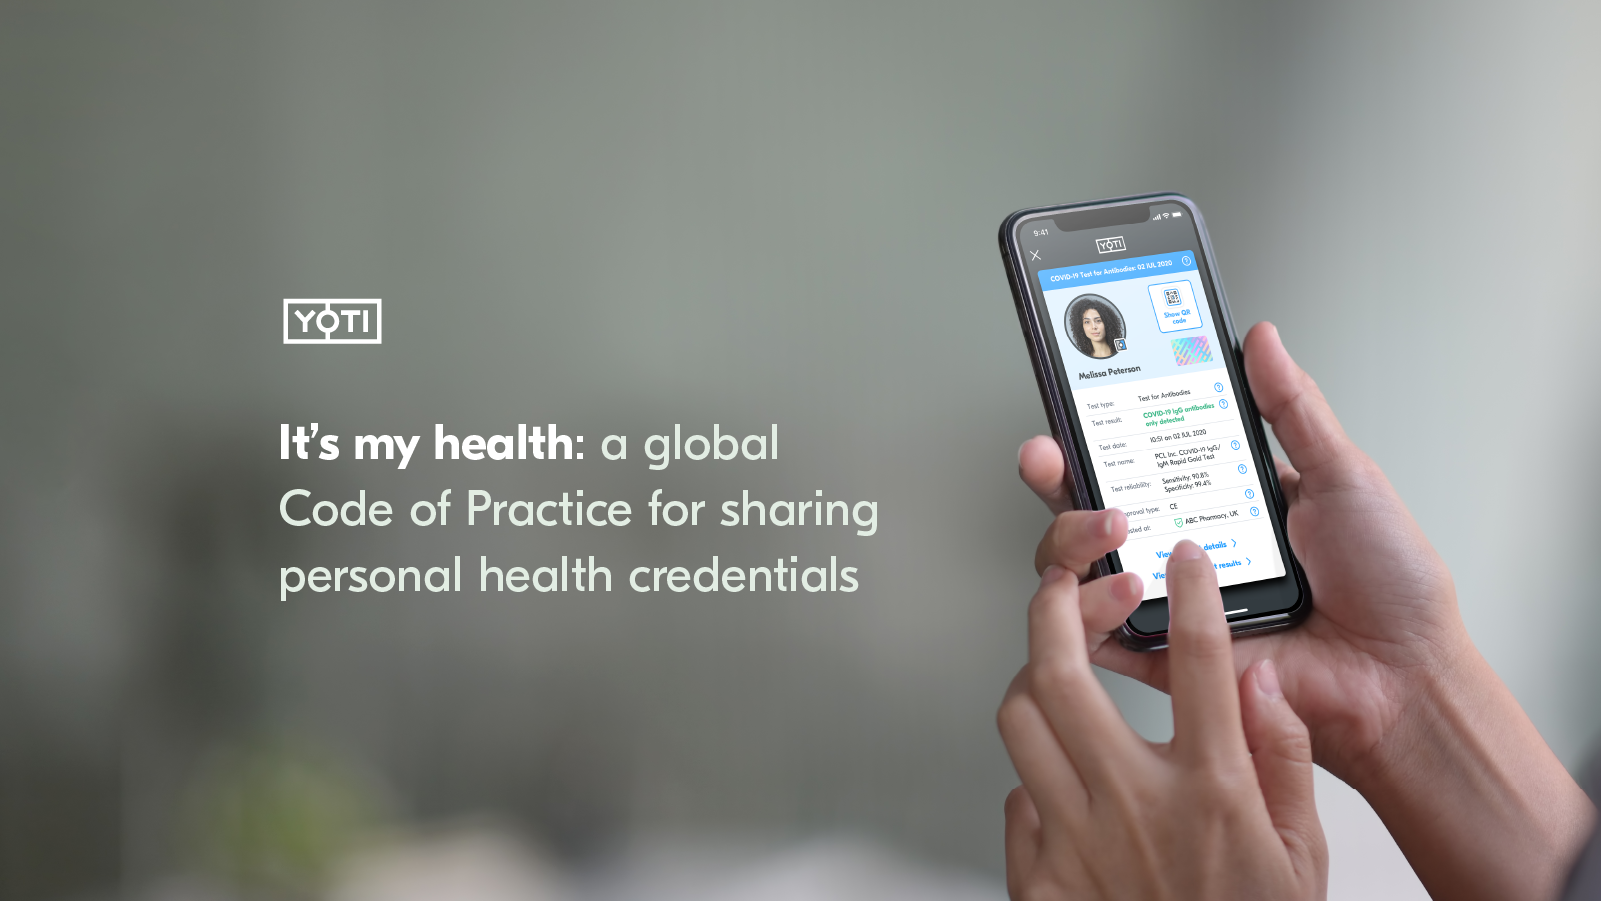 It’s my health: a global Code of Practice for sharing personal health credentials